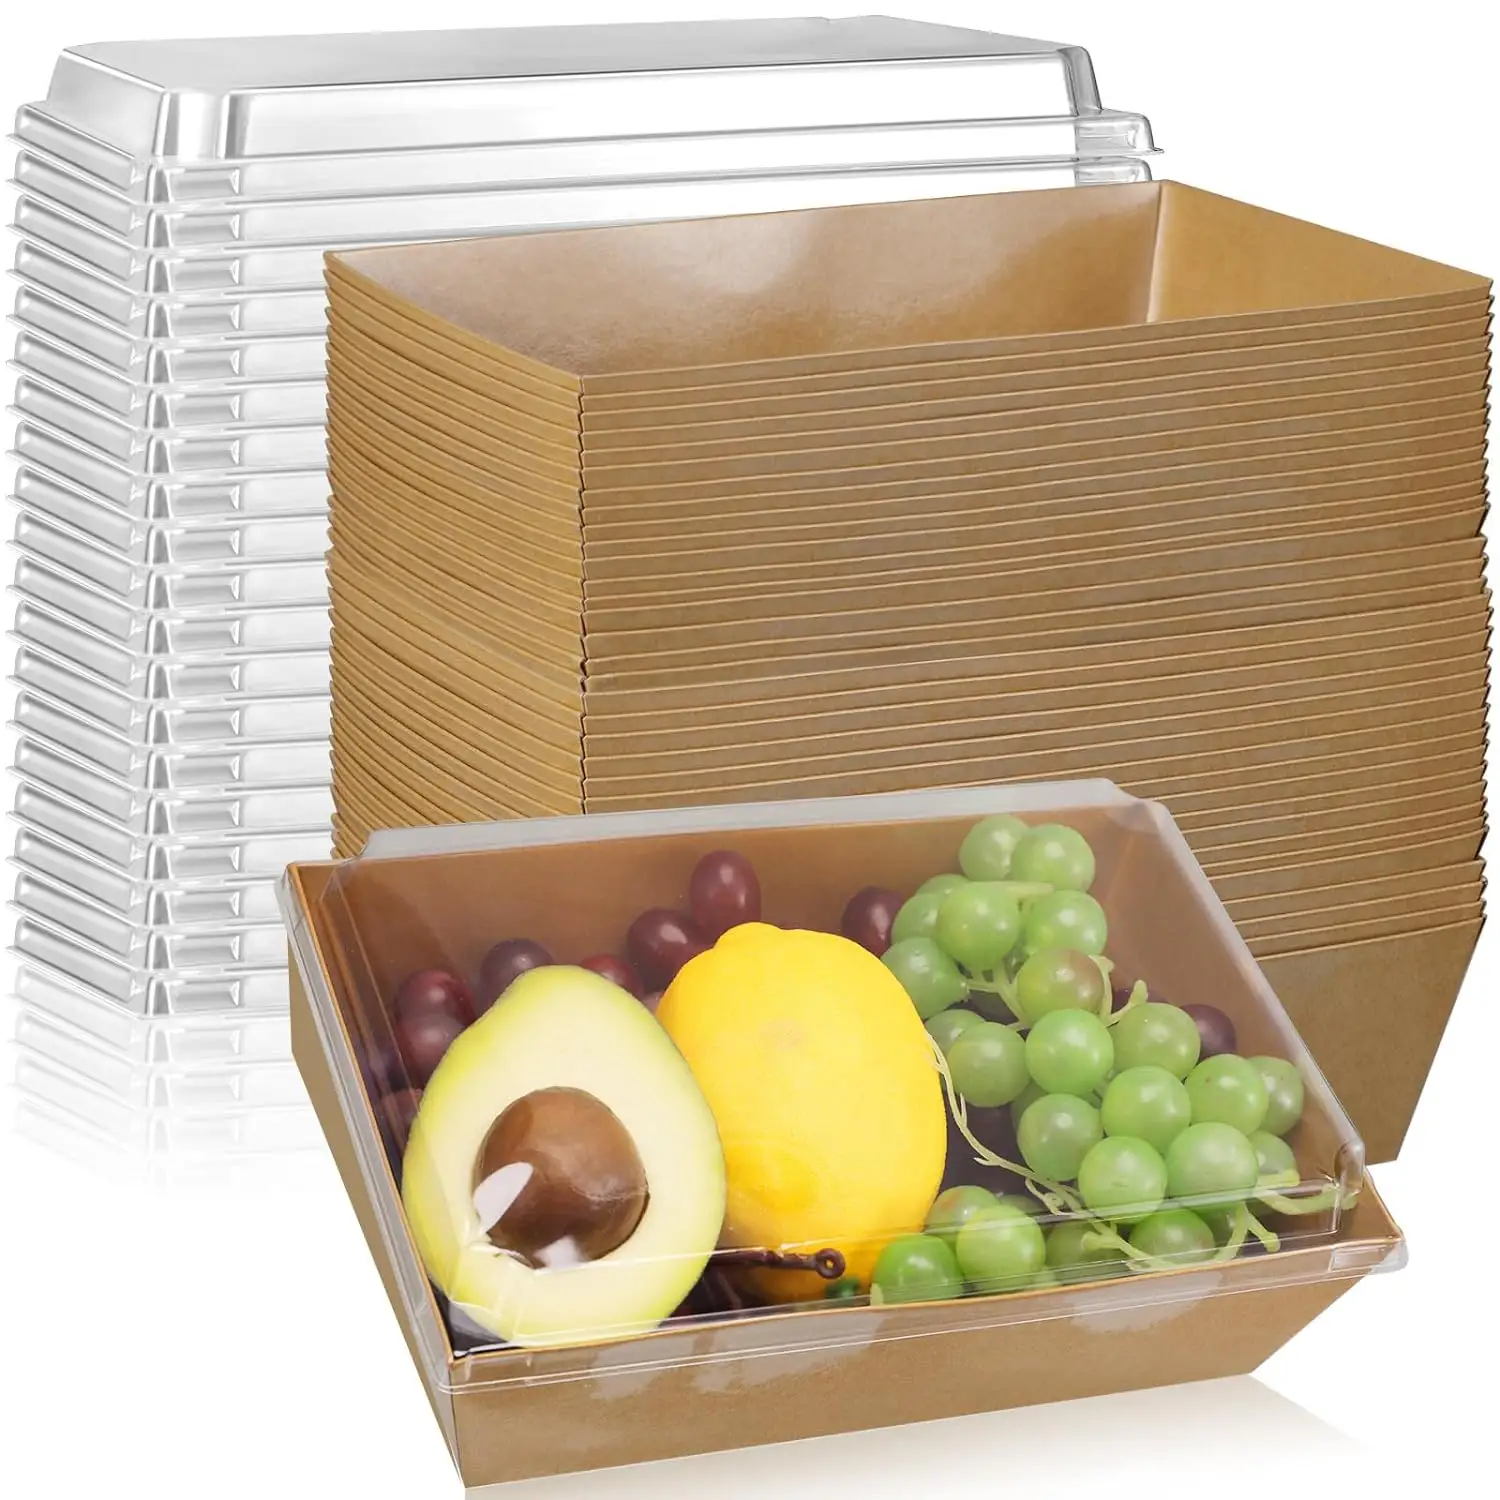 Disposable Paper Charcoal Box Rectangle / Square Food Container Baking Boxes For Cakes Biscuits Sandwiches